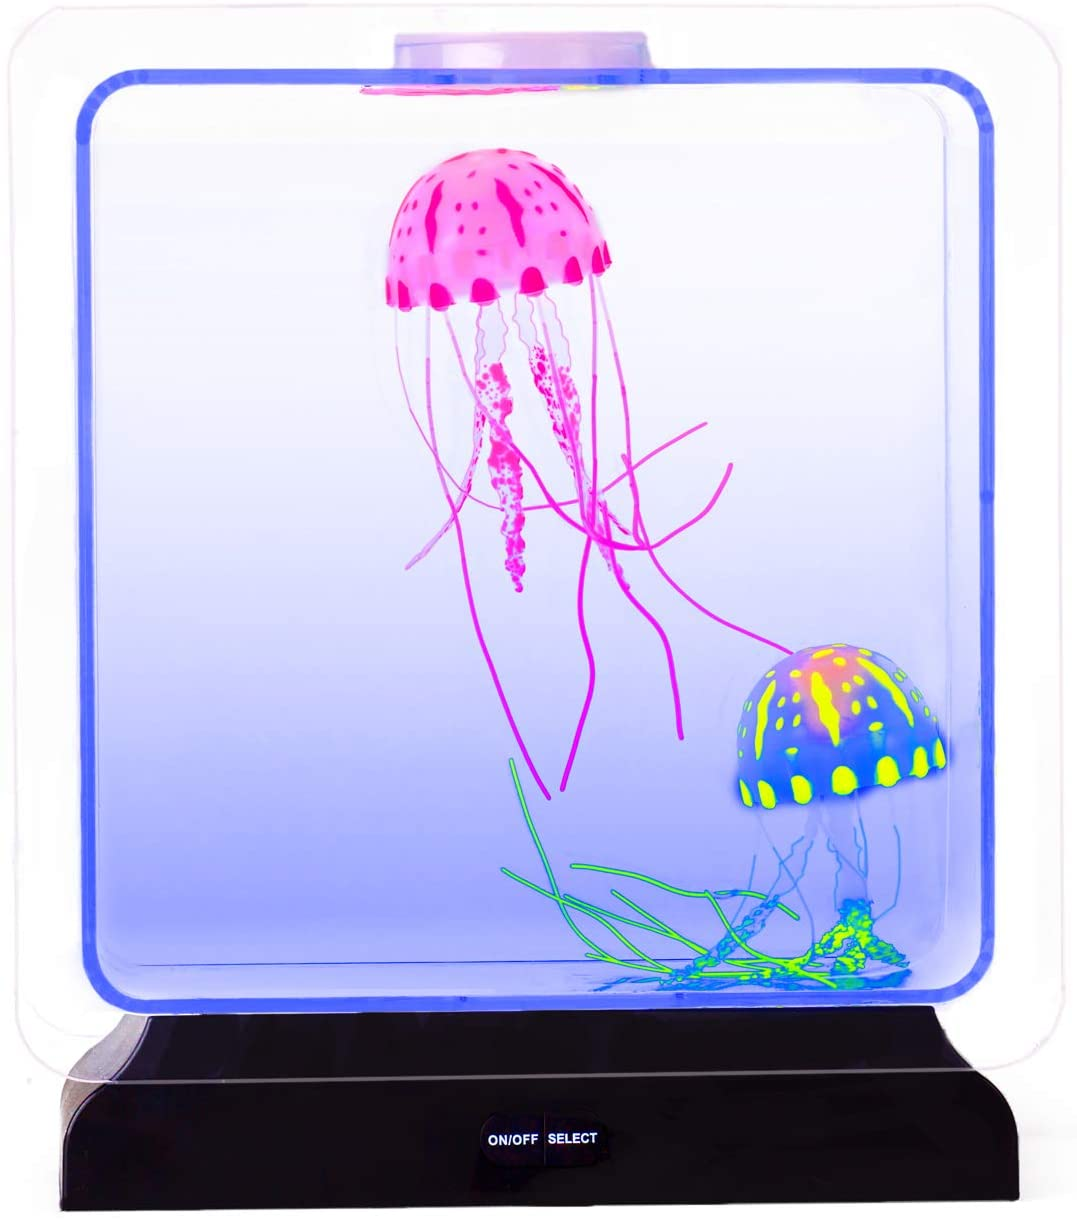 Jellyfish Lamp Tank Aquarium - Mood Night Light for Kids - Color Changing LED Lamp - Comes with 2 Jelly Fish